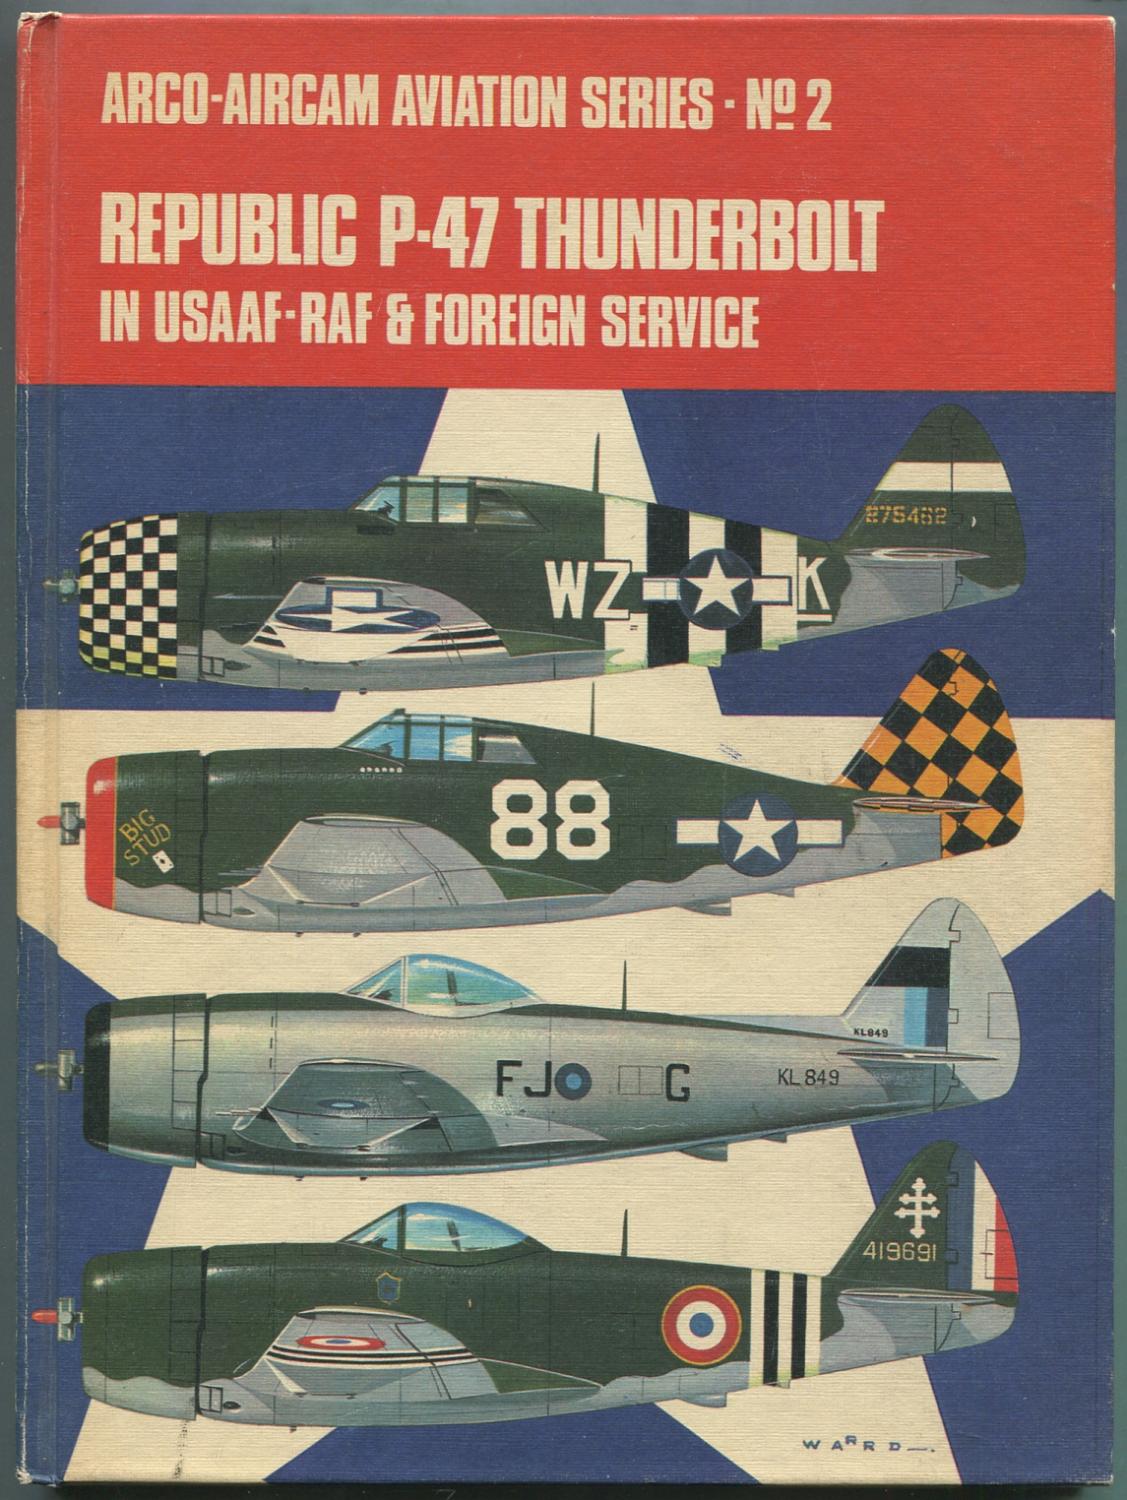 Republic P-47 Thunderbolt in USAAF, RAF and Foreign Service. Aircam No. 2